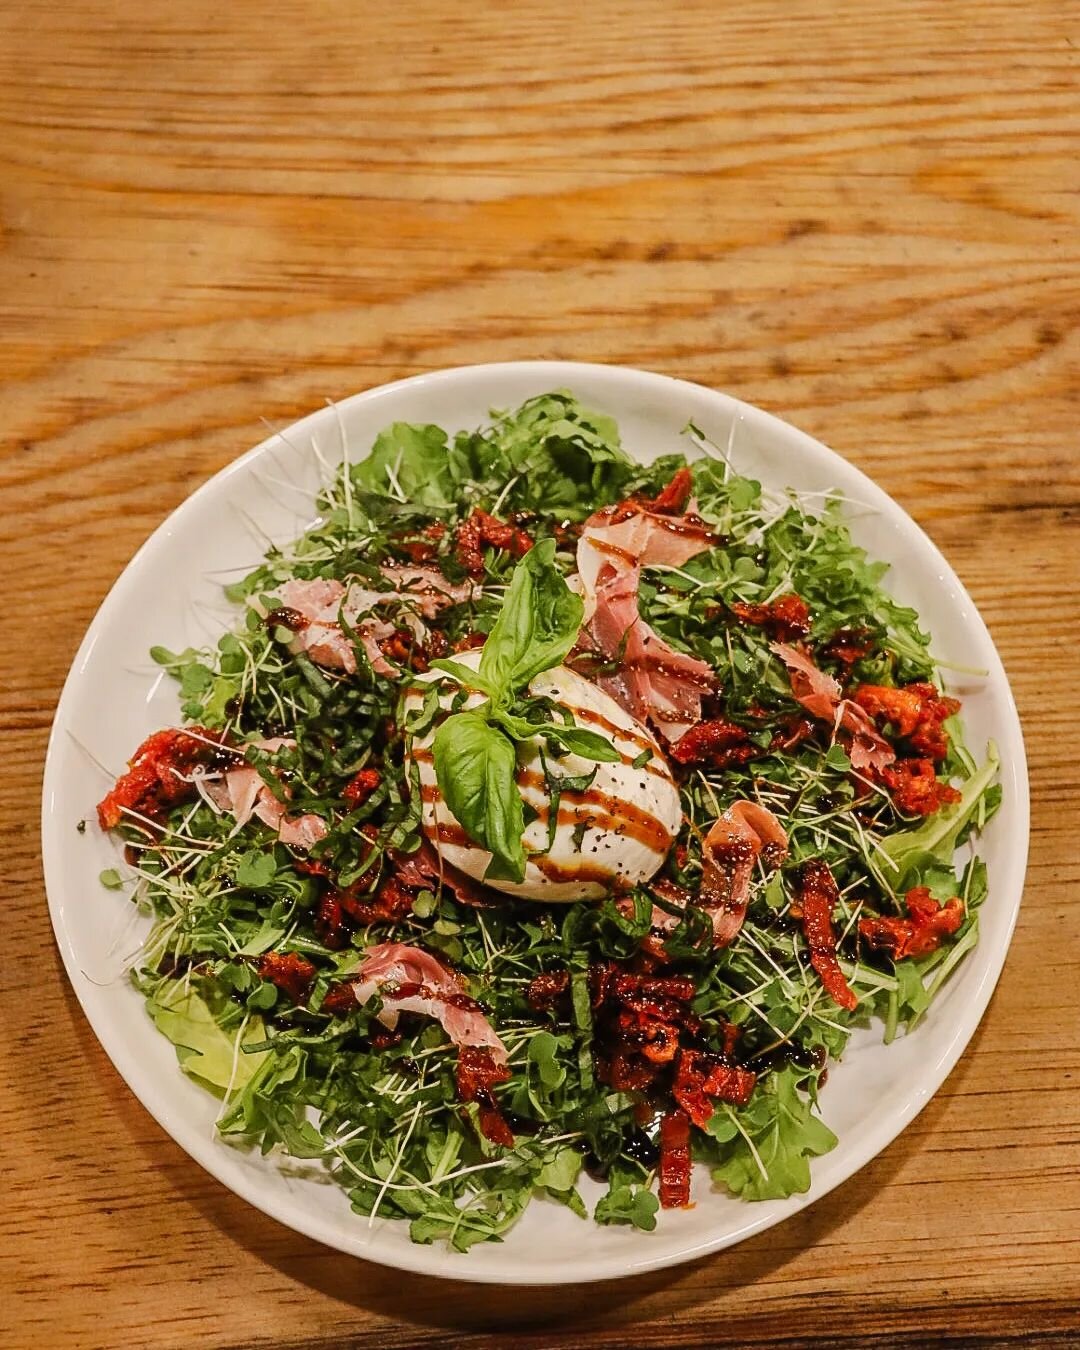 Have you tried our Procuitto Salad? We have lots of food options, from small bites to sandwiches and flat breads, soups, salads, and more!

Come pair something with a glass of wine or beer. We are open until 7pm!